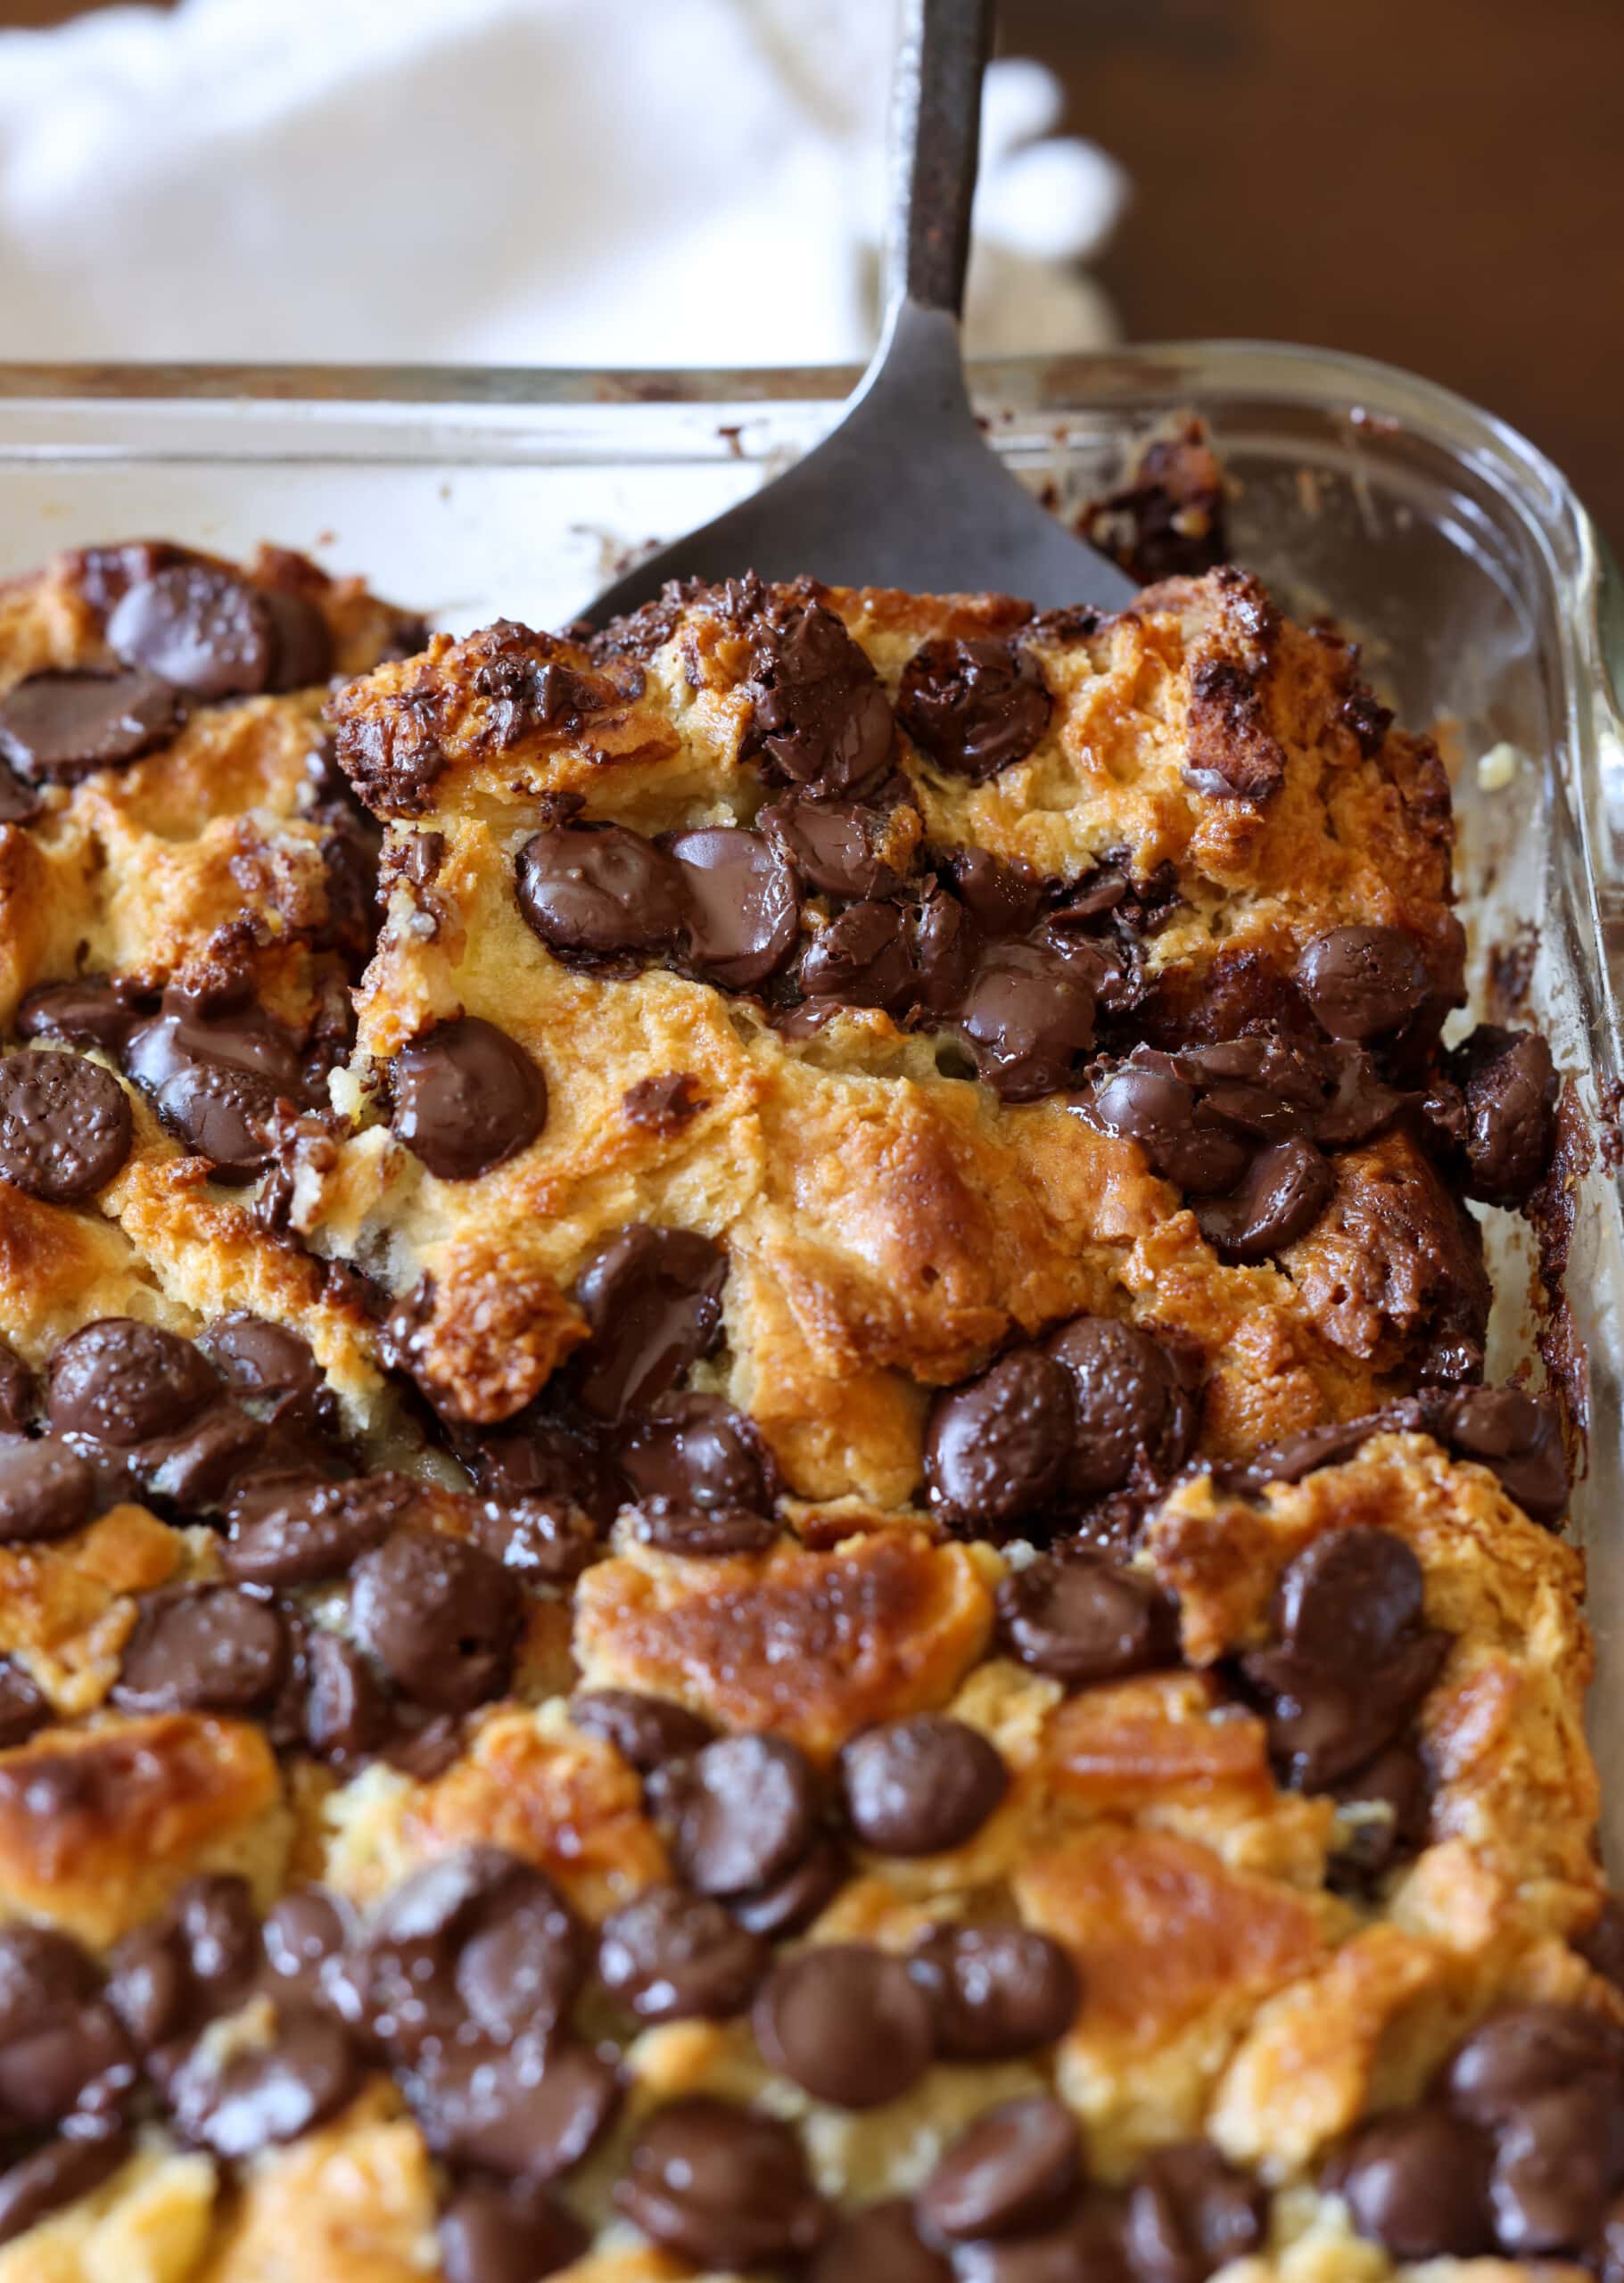 Scooping out Biscuit Bread Pudding topped with chocolate chips